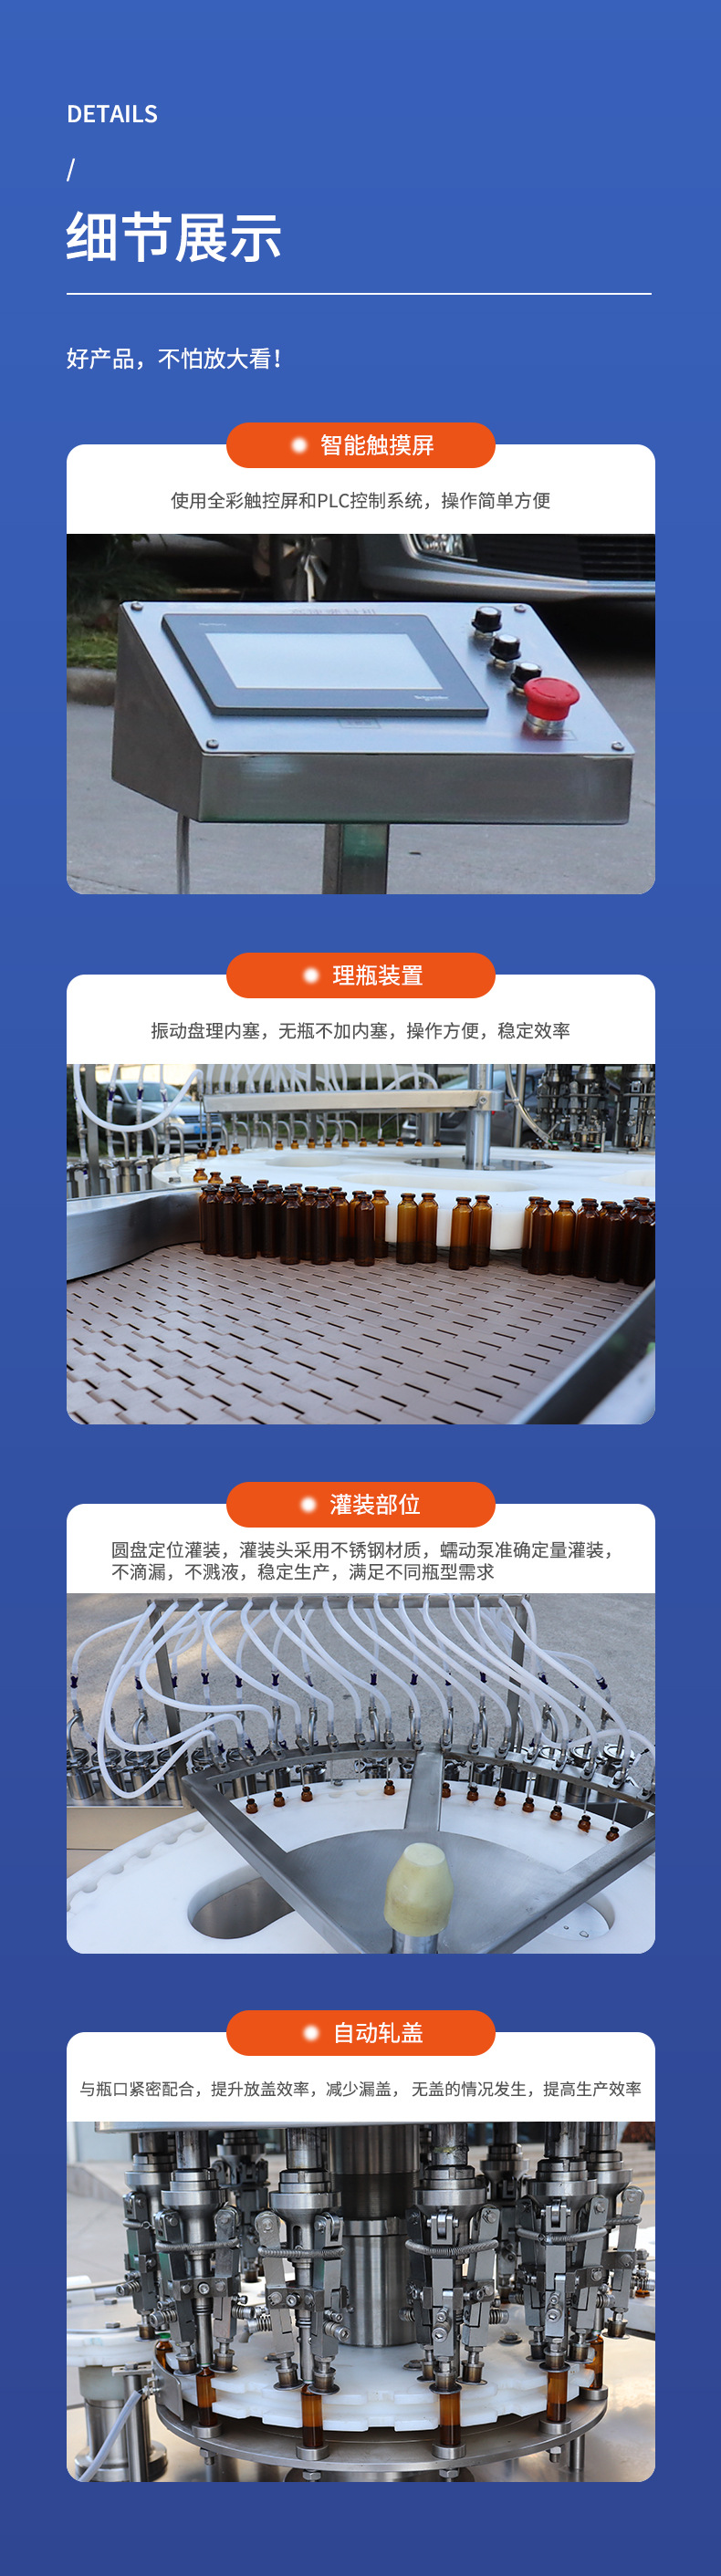 Shengqi Syrup Oral Liquid Filling Machine Manufacturer 30-150m Bottle Washing, Oven, Capping and Linkage Production Line